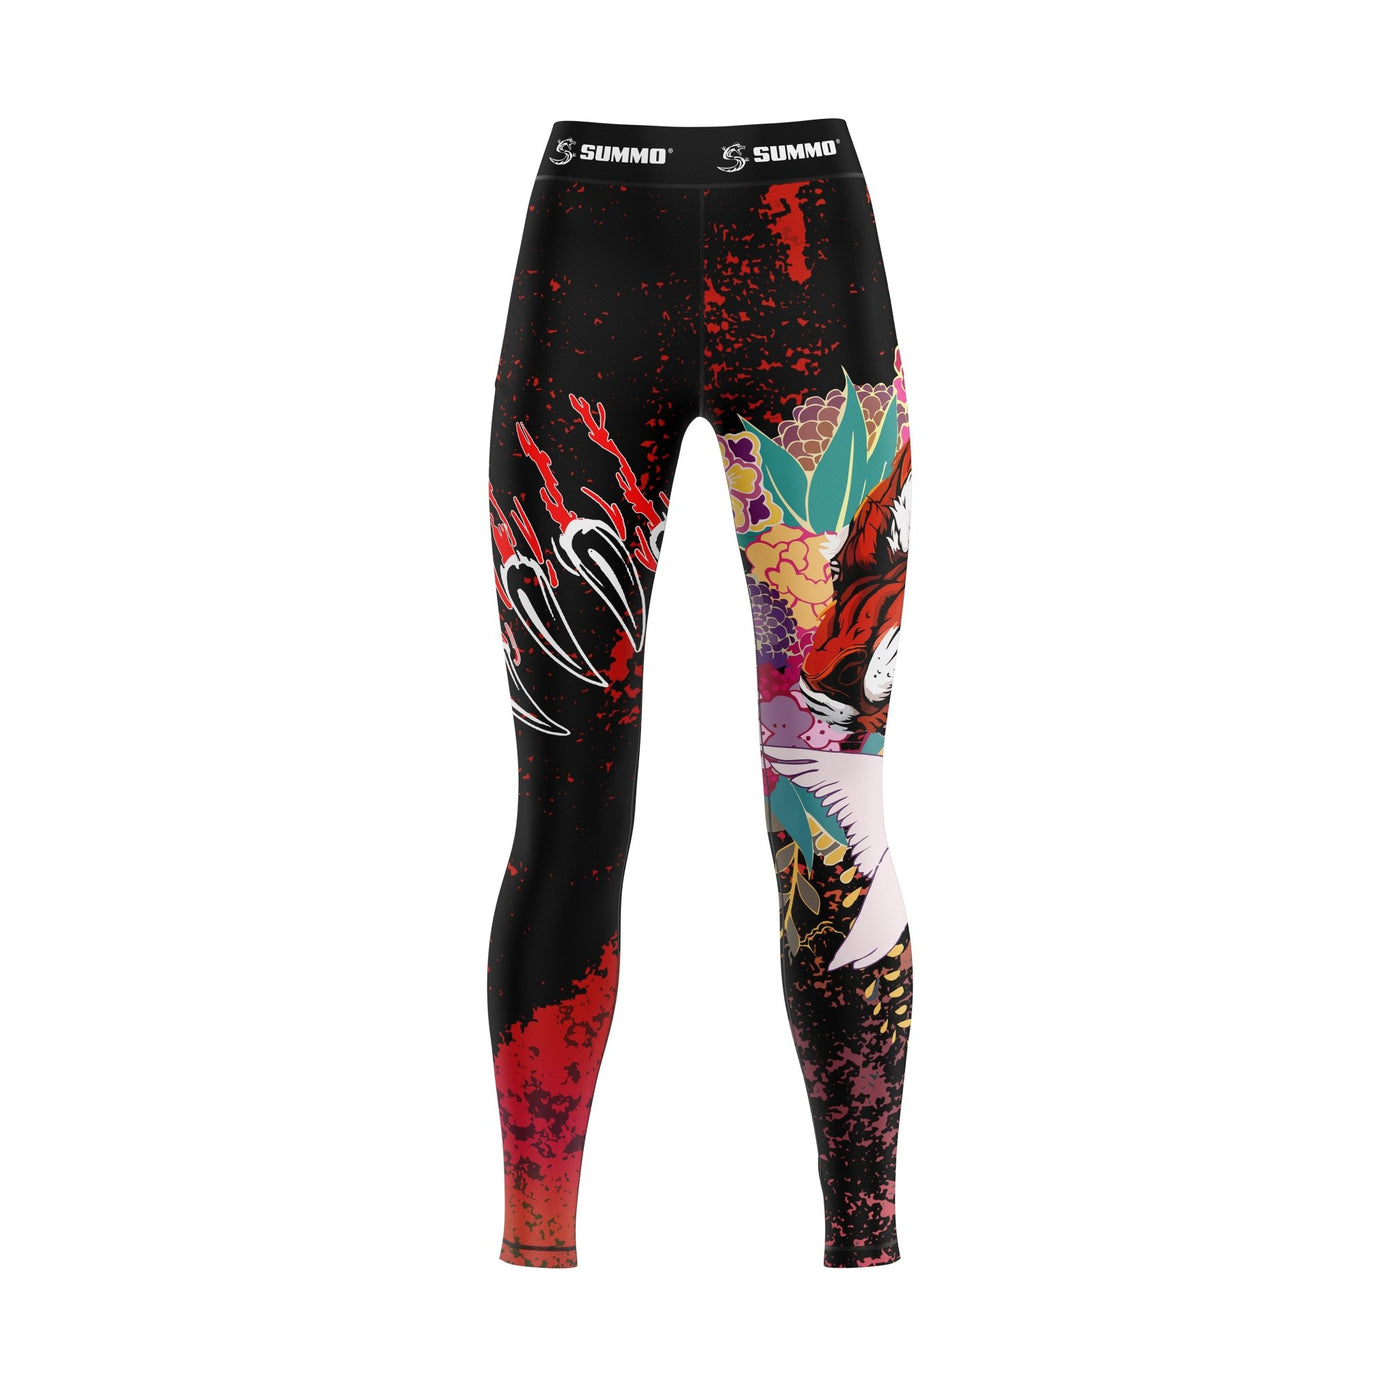 Beast Compression Pants for Men/Women - Summo Sports